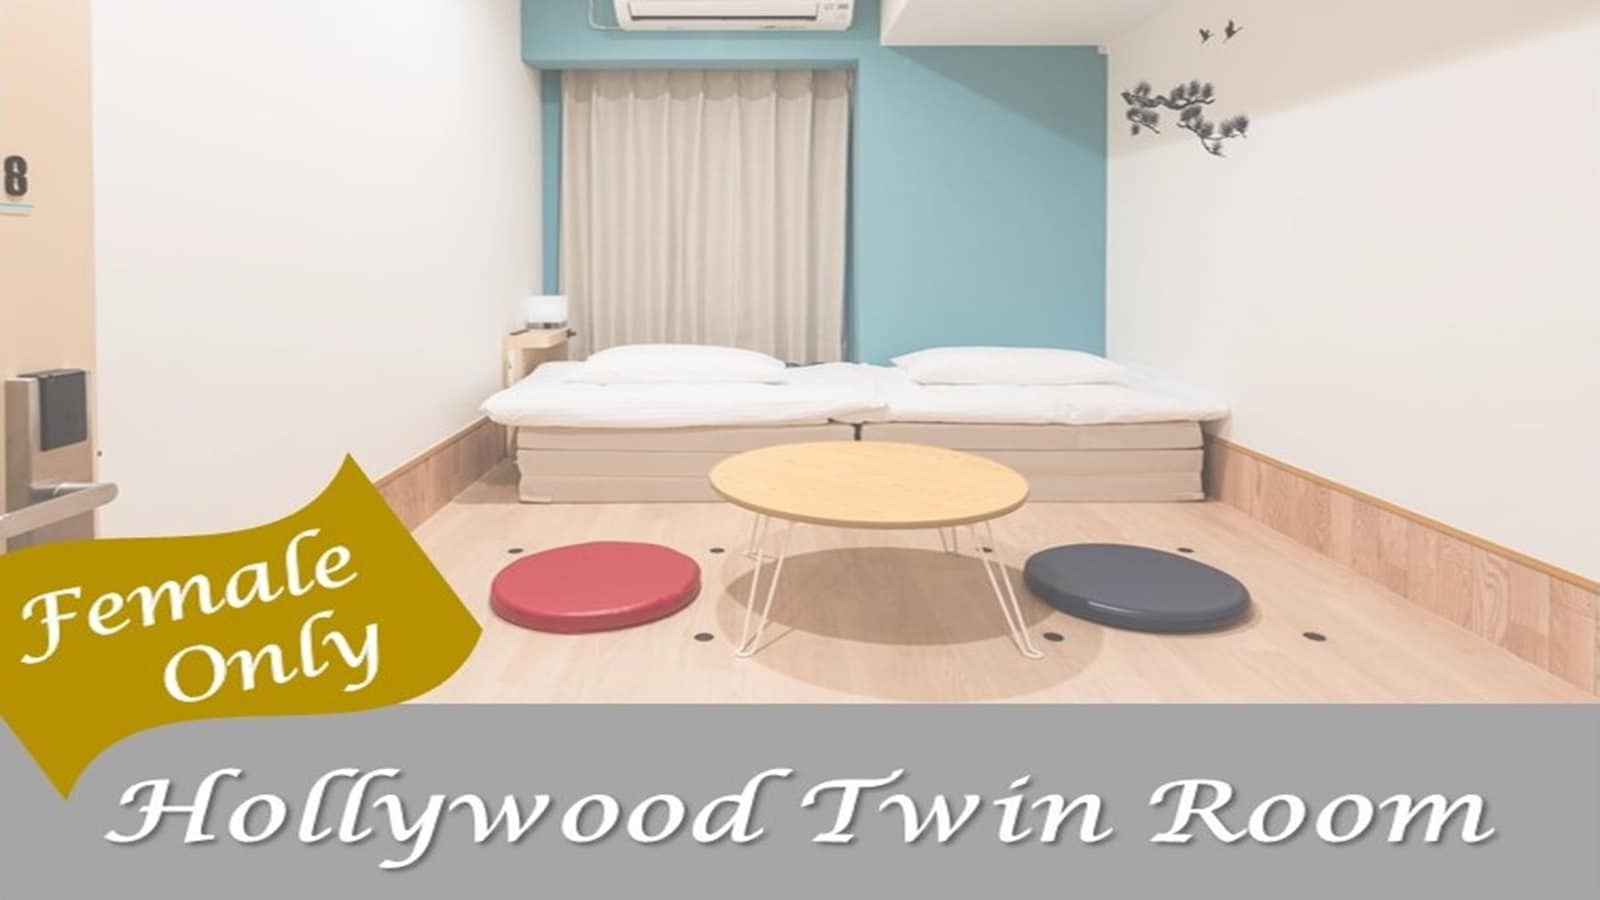 Female only Hollywood twin room